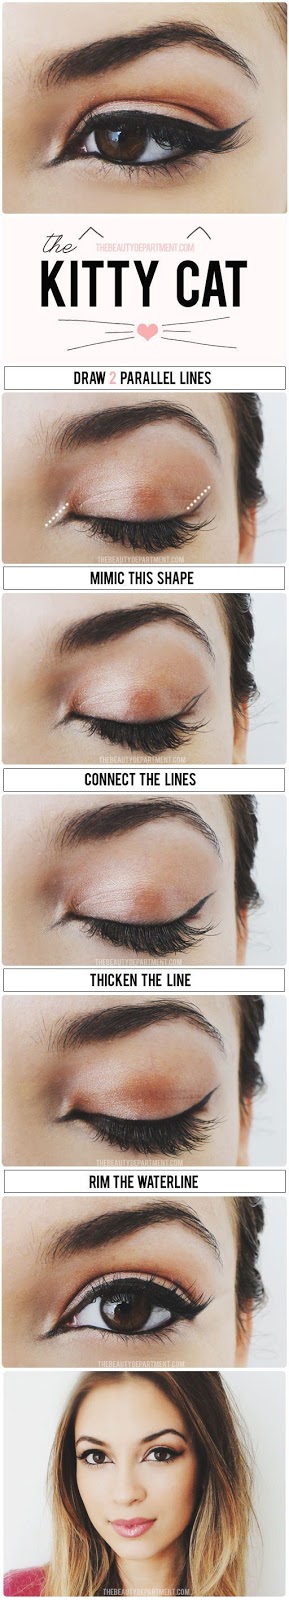 17 Insanely Beautiful Makeup Ideas For When You're Feeling Your Look